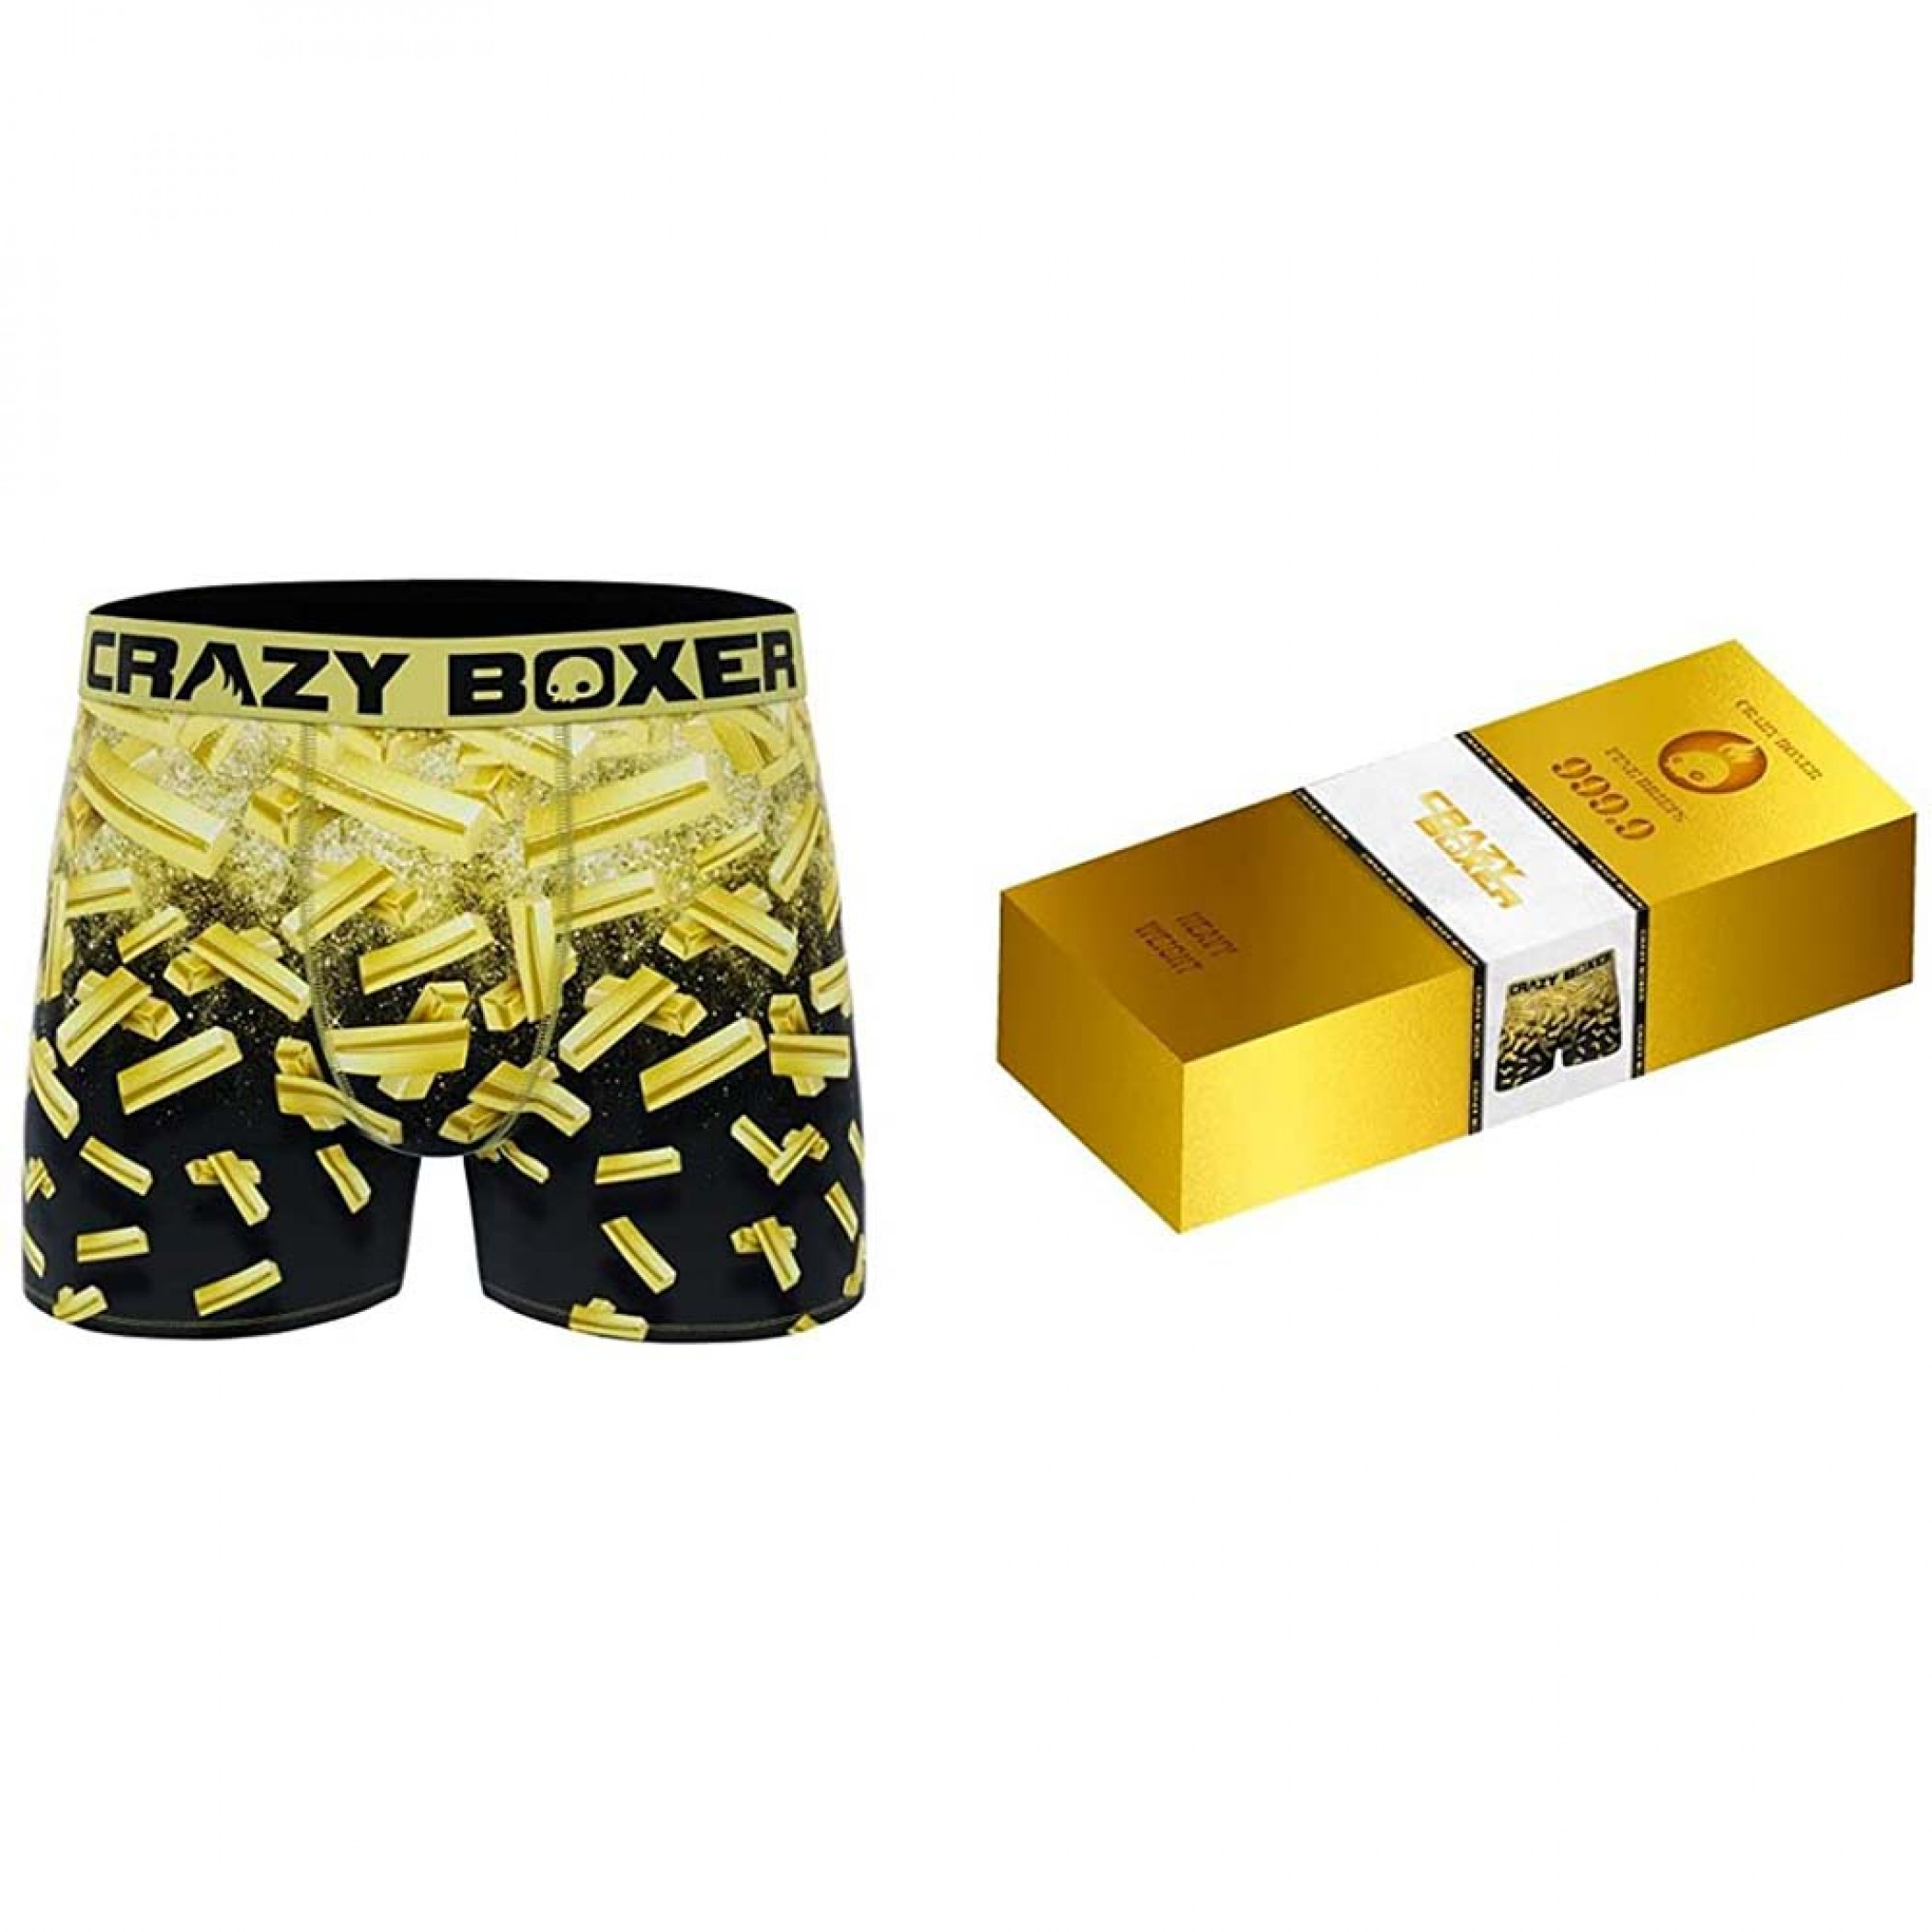 Crazy Boxers Gold Bars All Over Boxer Briefs in Gold Bar Box